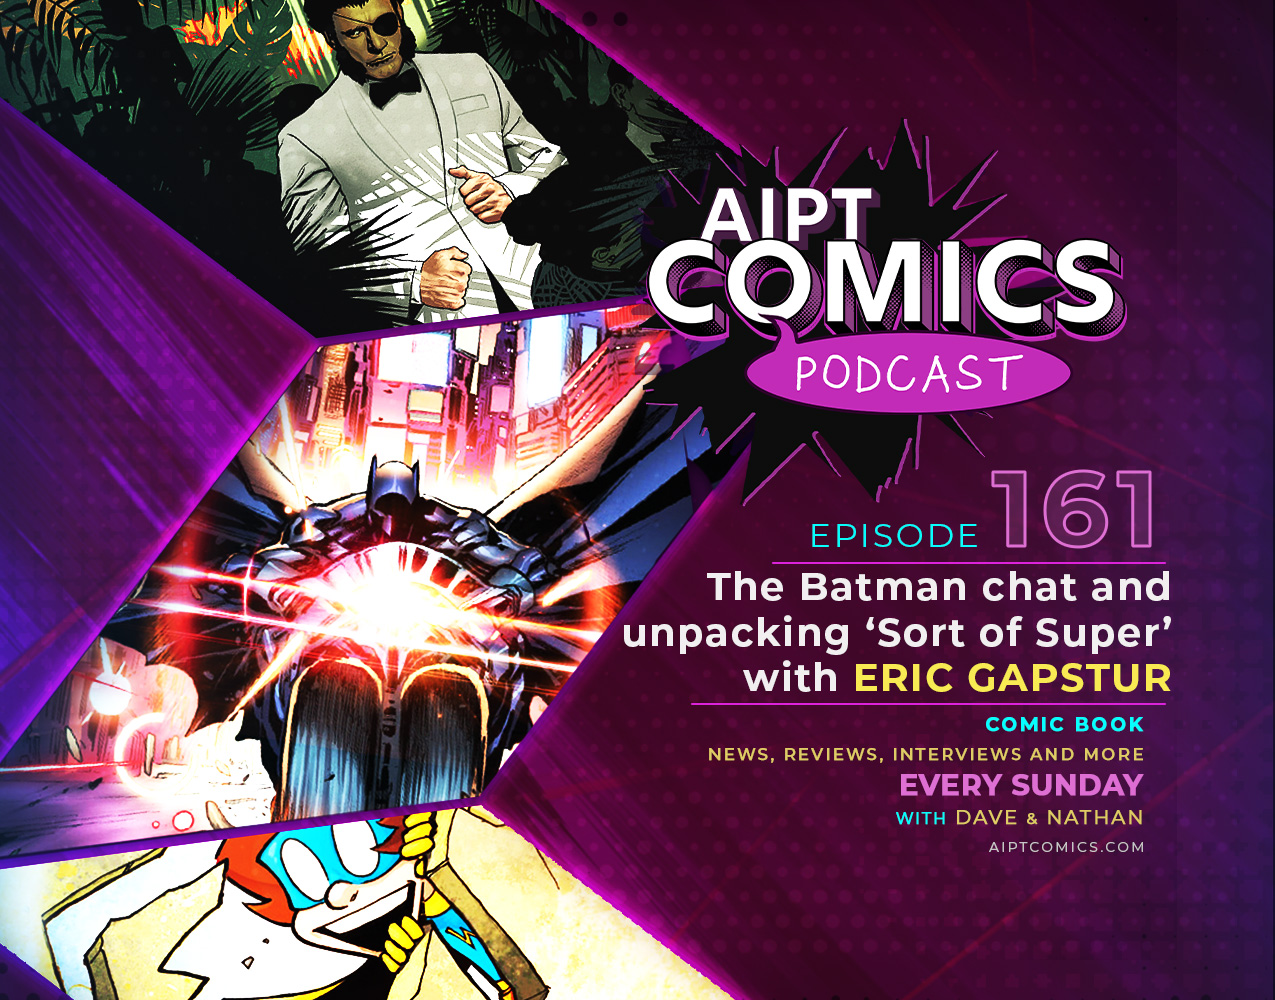 AIPT Comics podcast episode 161: 'The Batman' chat and unpacking ‘Sort of Super’ with Eric Gapstur